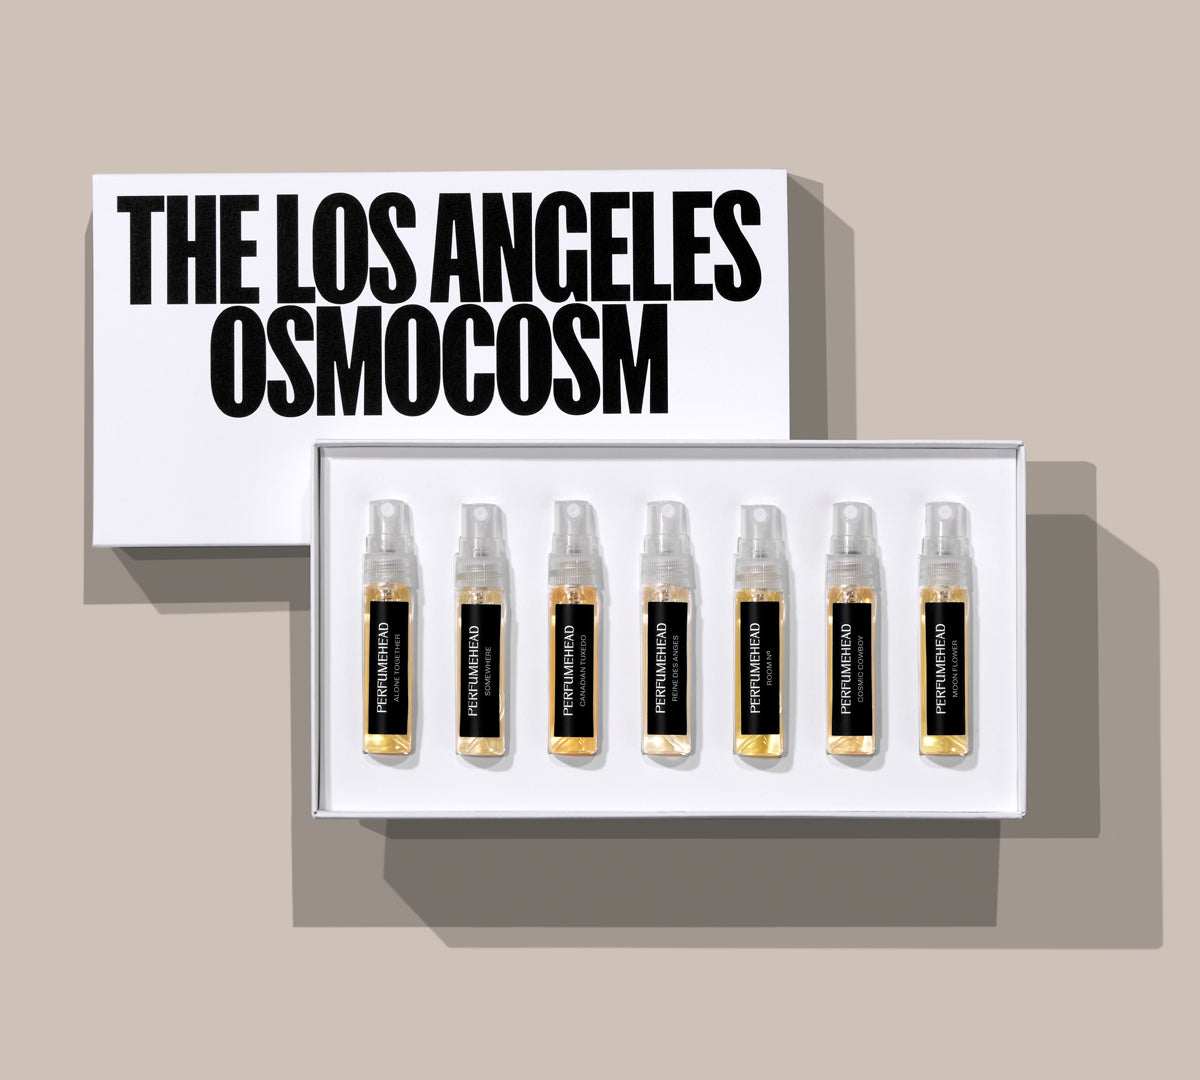 The Los Angeles Osmocosm Discovery Set by Perfumehead box and bottles.